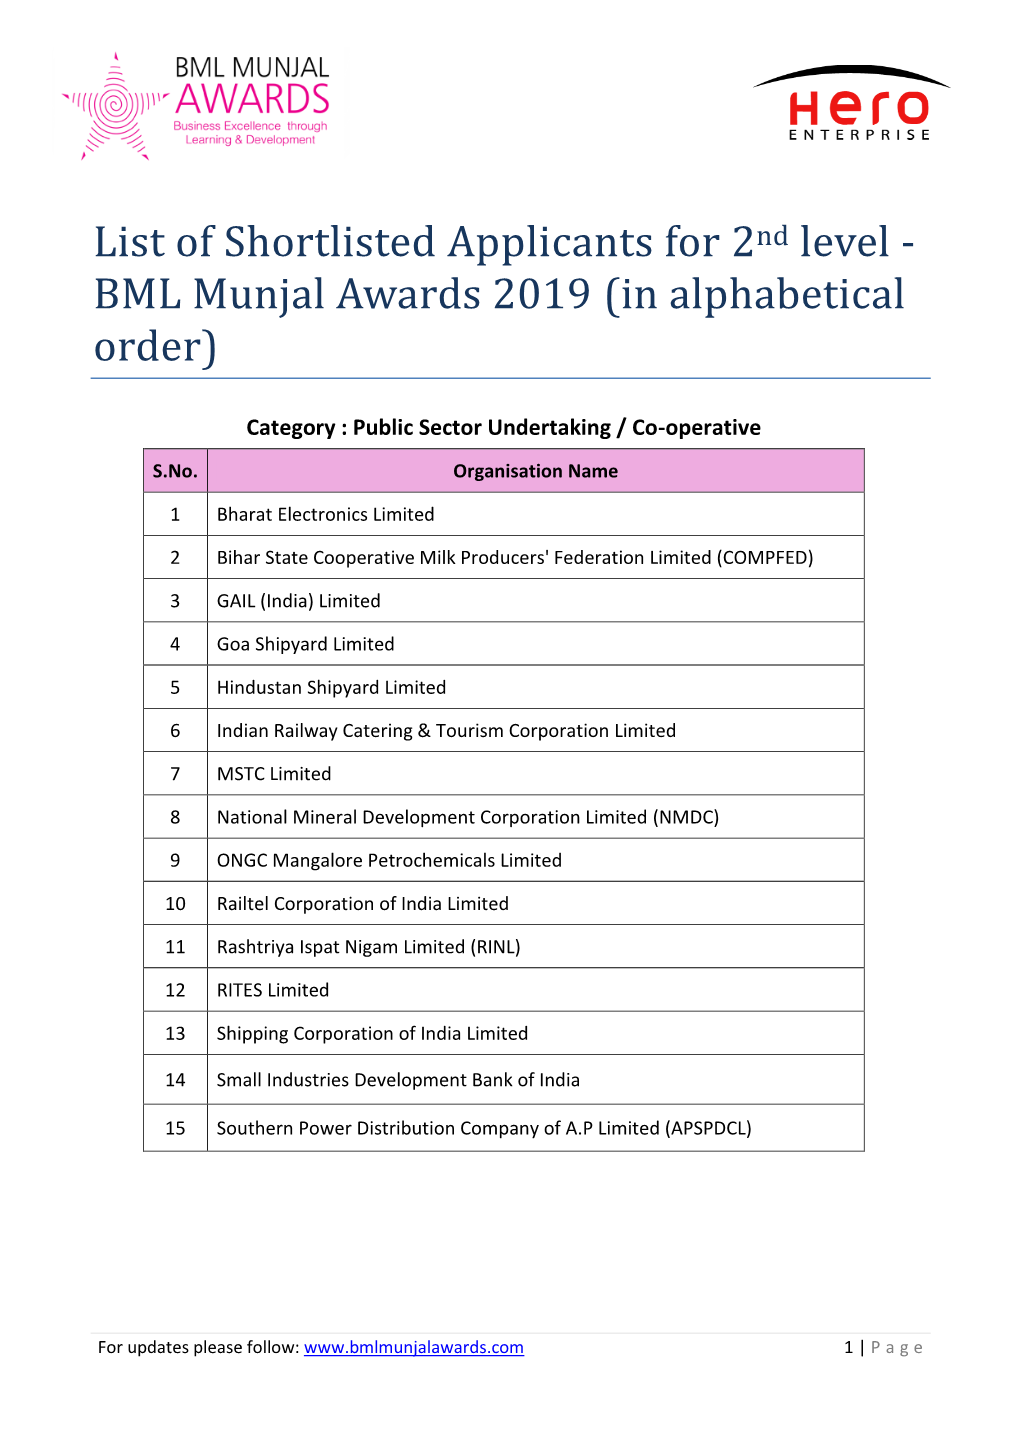 List of Shortlisted Applicants for 2Nd Level - BML Munjal Awards 2019 (In Alphabetical Order)